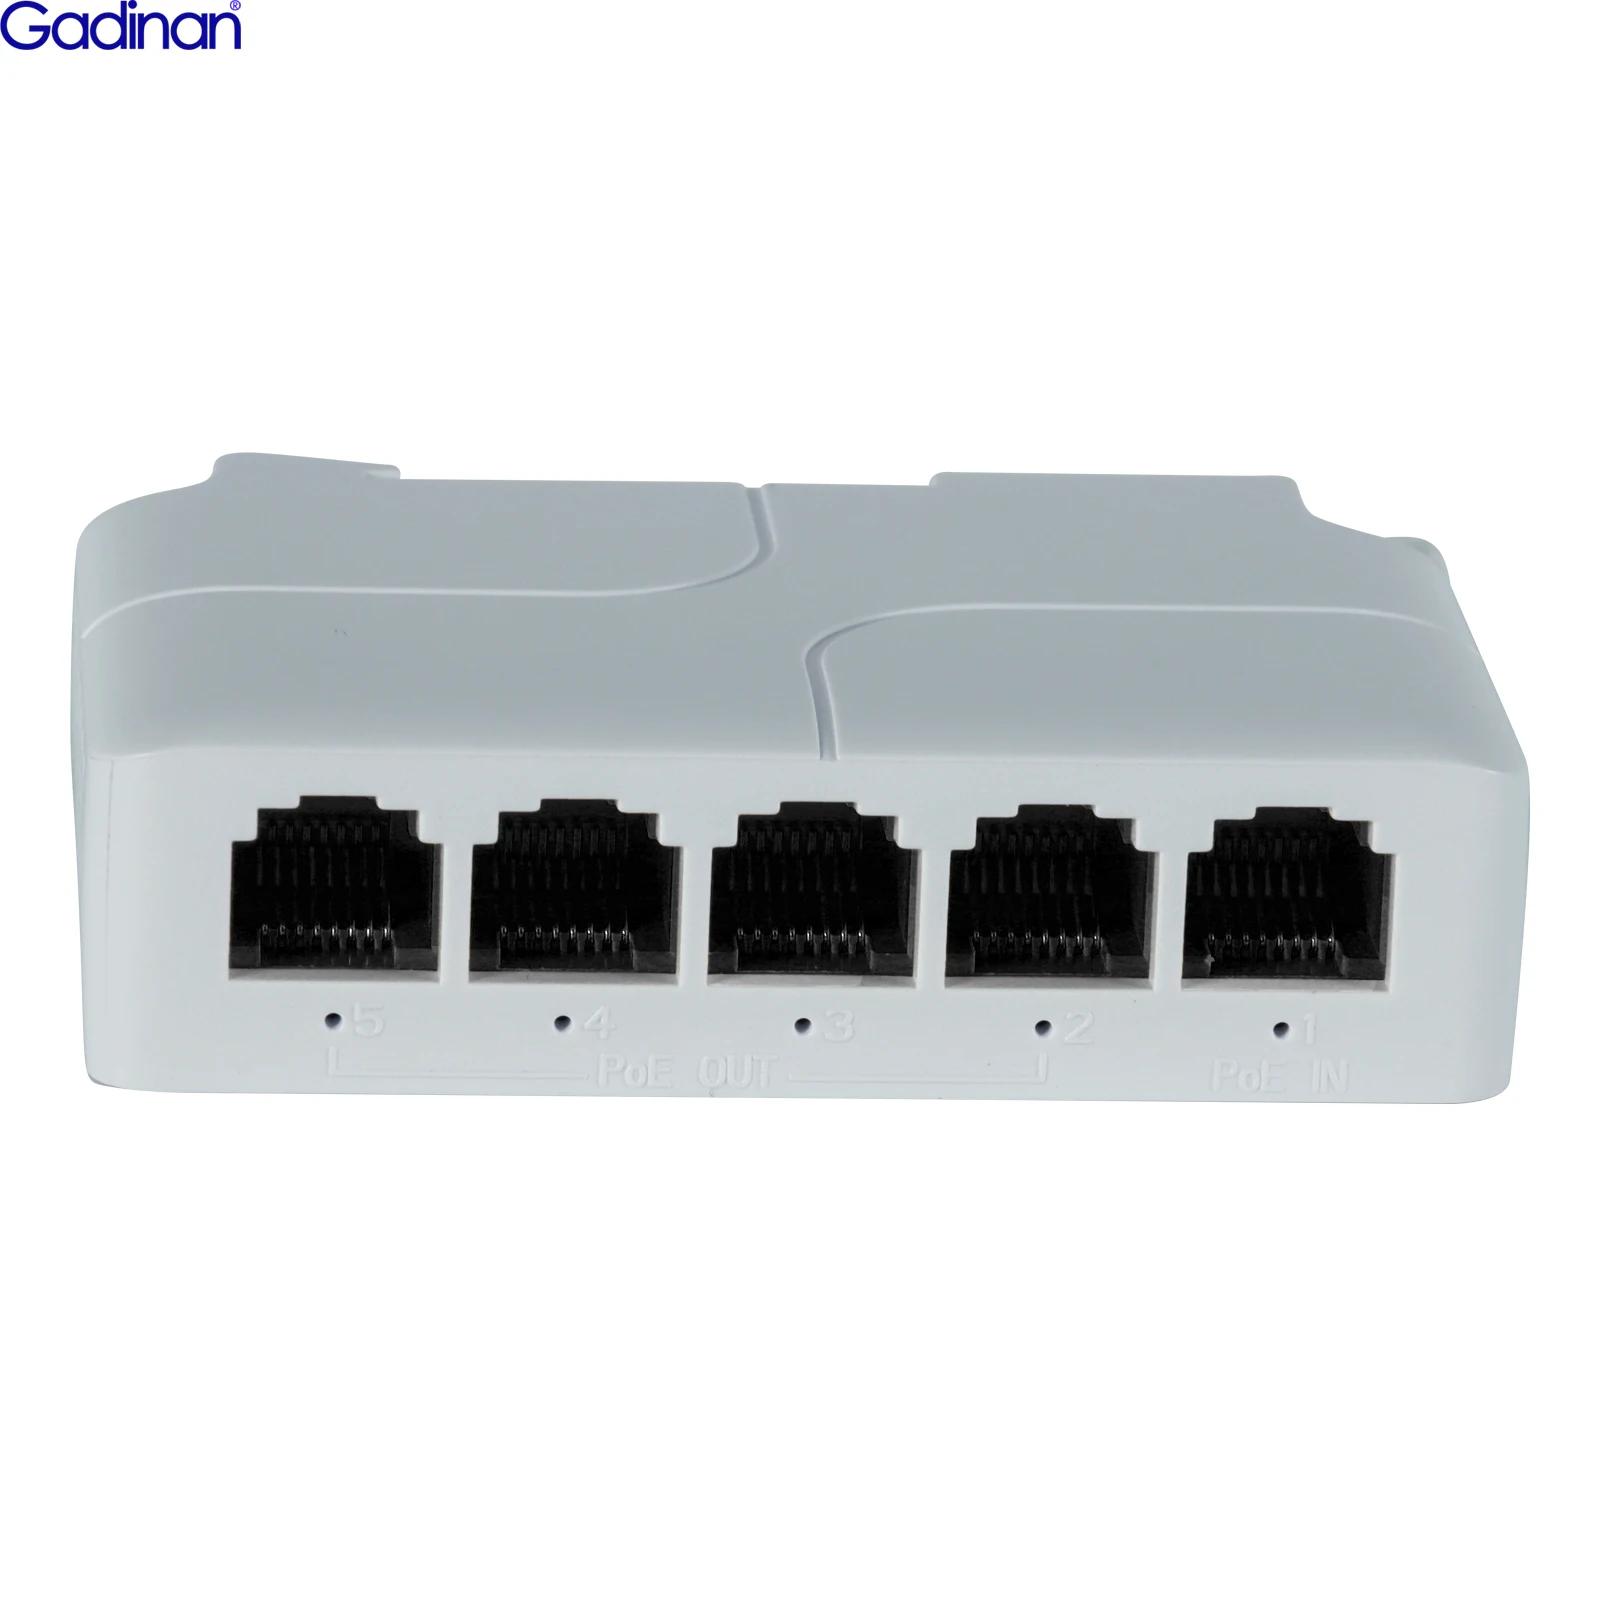 IP ī޶ AP  PoE ͽٴ , 5 Ʈ, 100Mbps, 90W, 100 , VLAN 44-57V ȣȯ, IEEE802.3af/at RJ45 1 in 4 Out